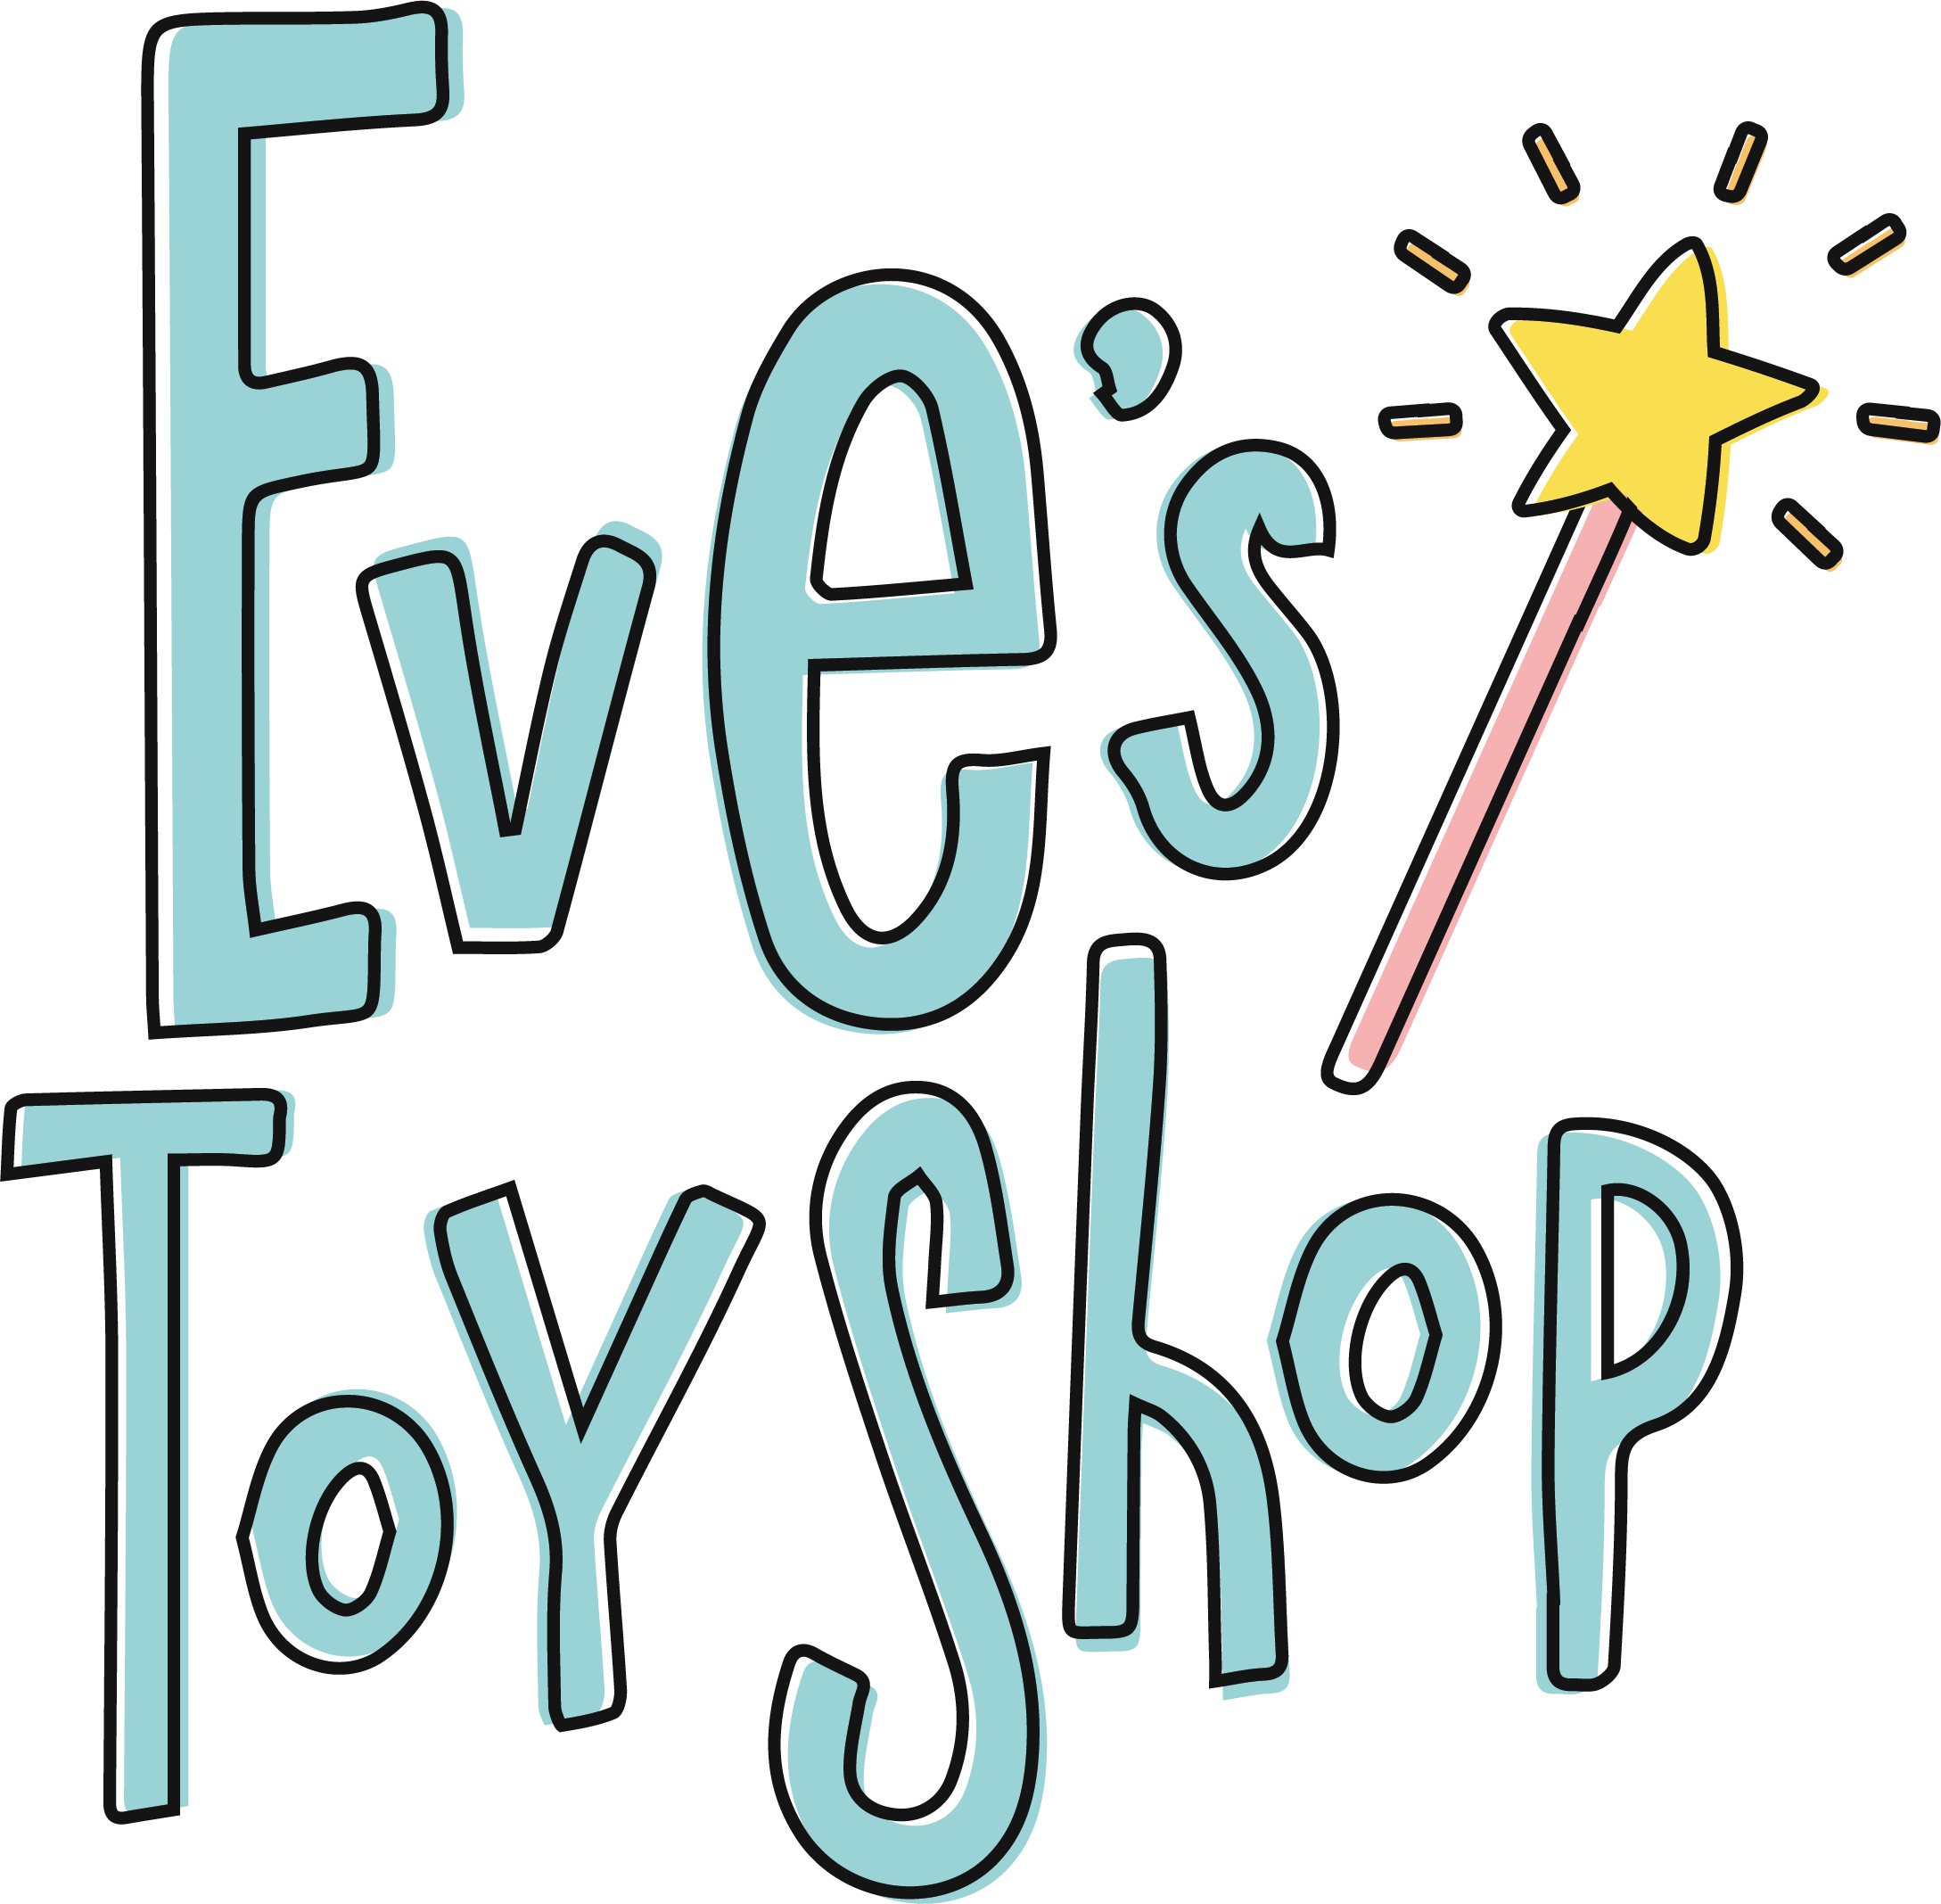 Eve's Toy Shop